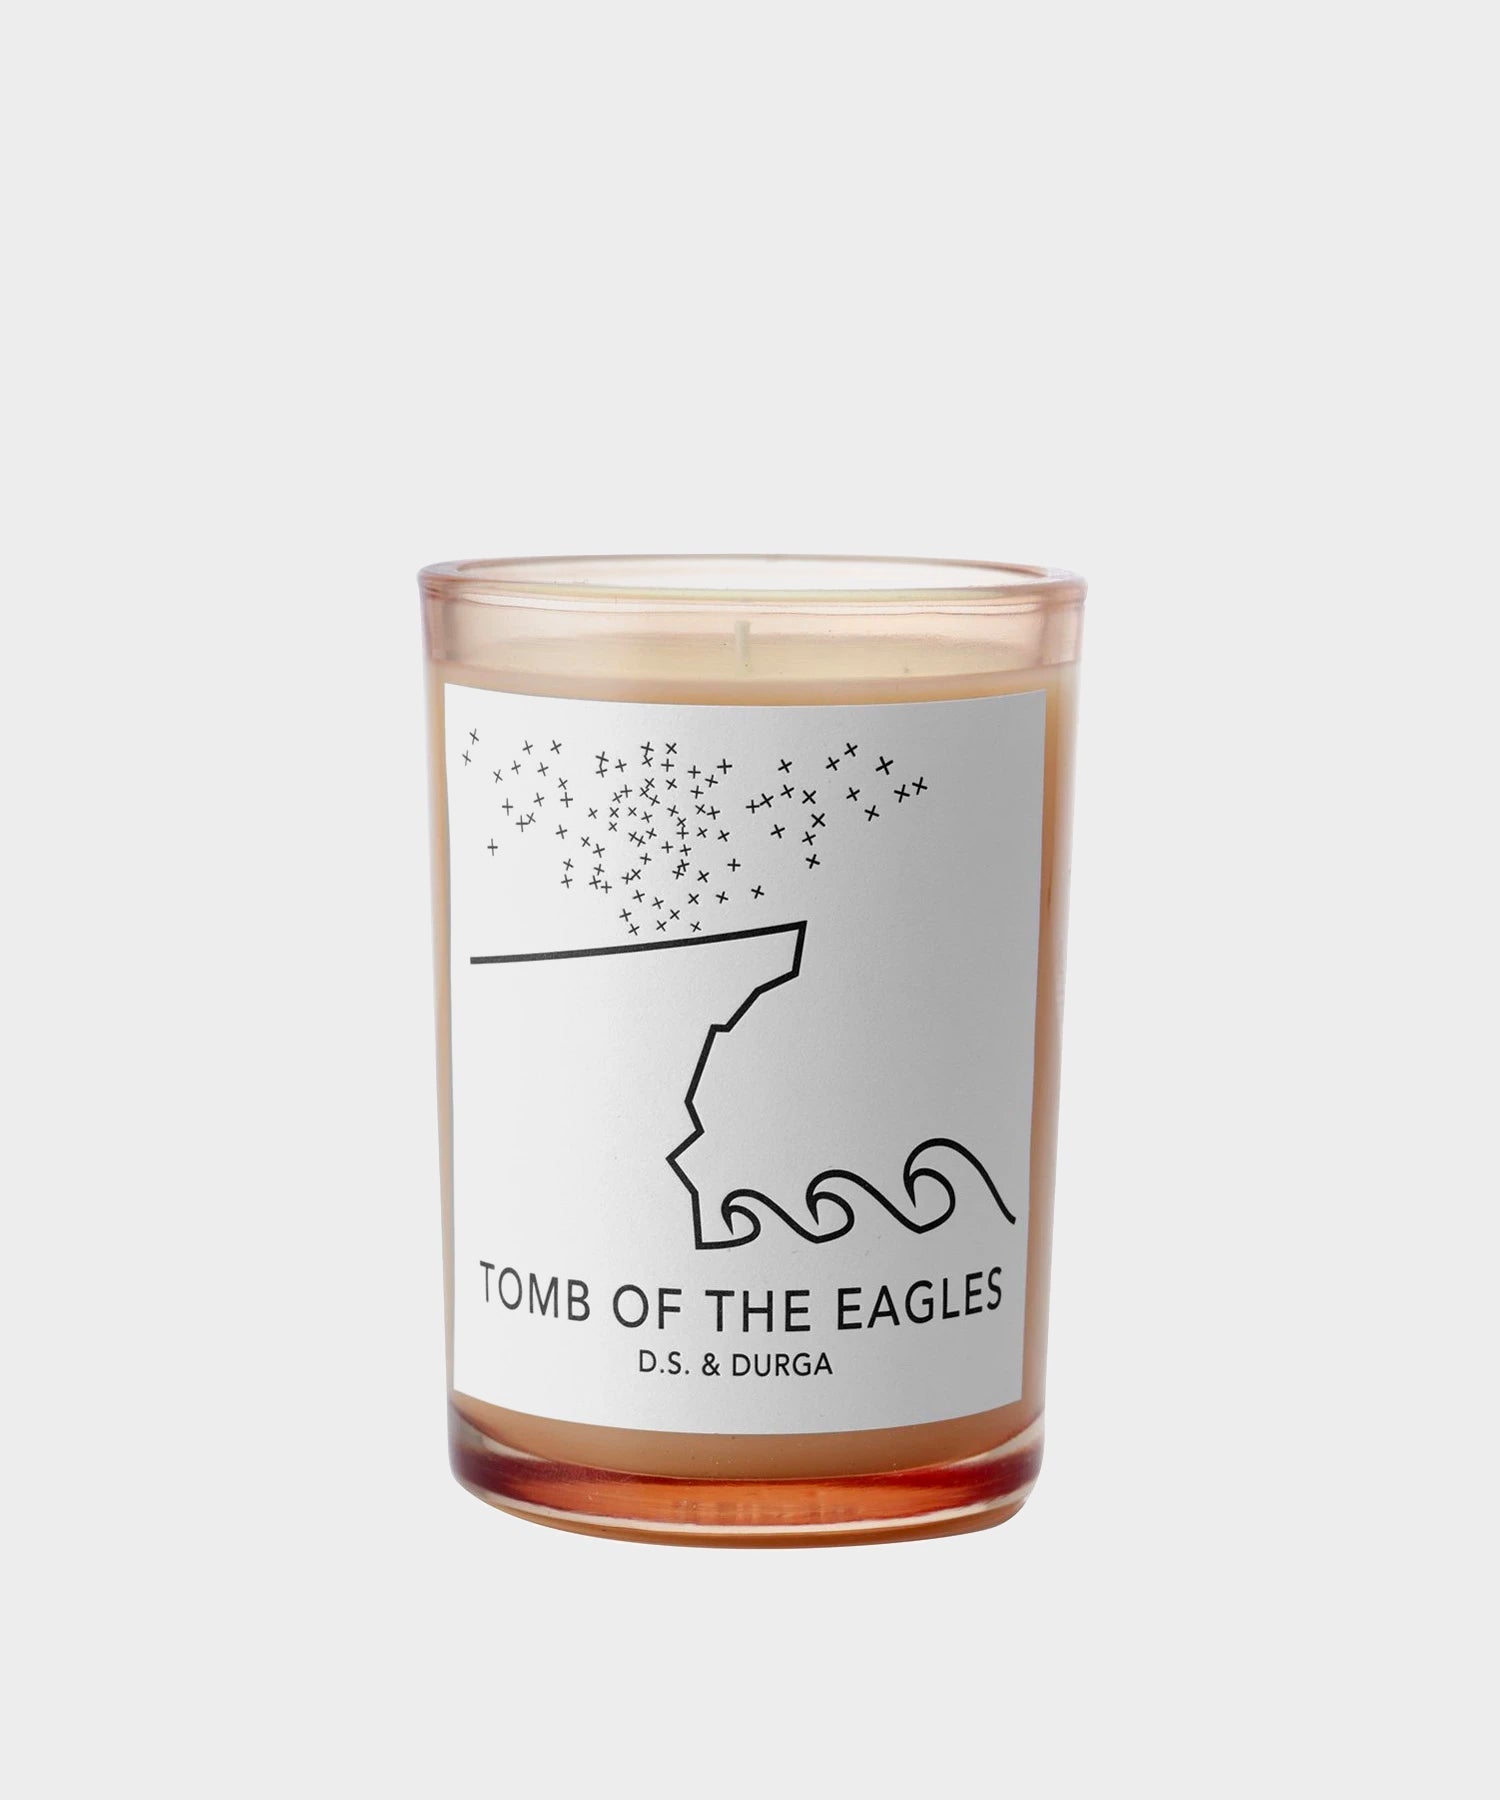 D.S. & Durga Tomb Of The Eagles 7oz Candle